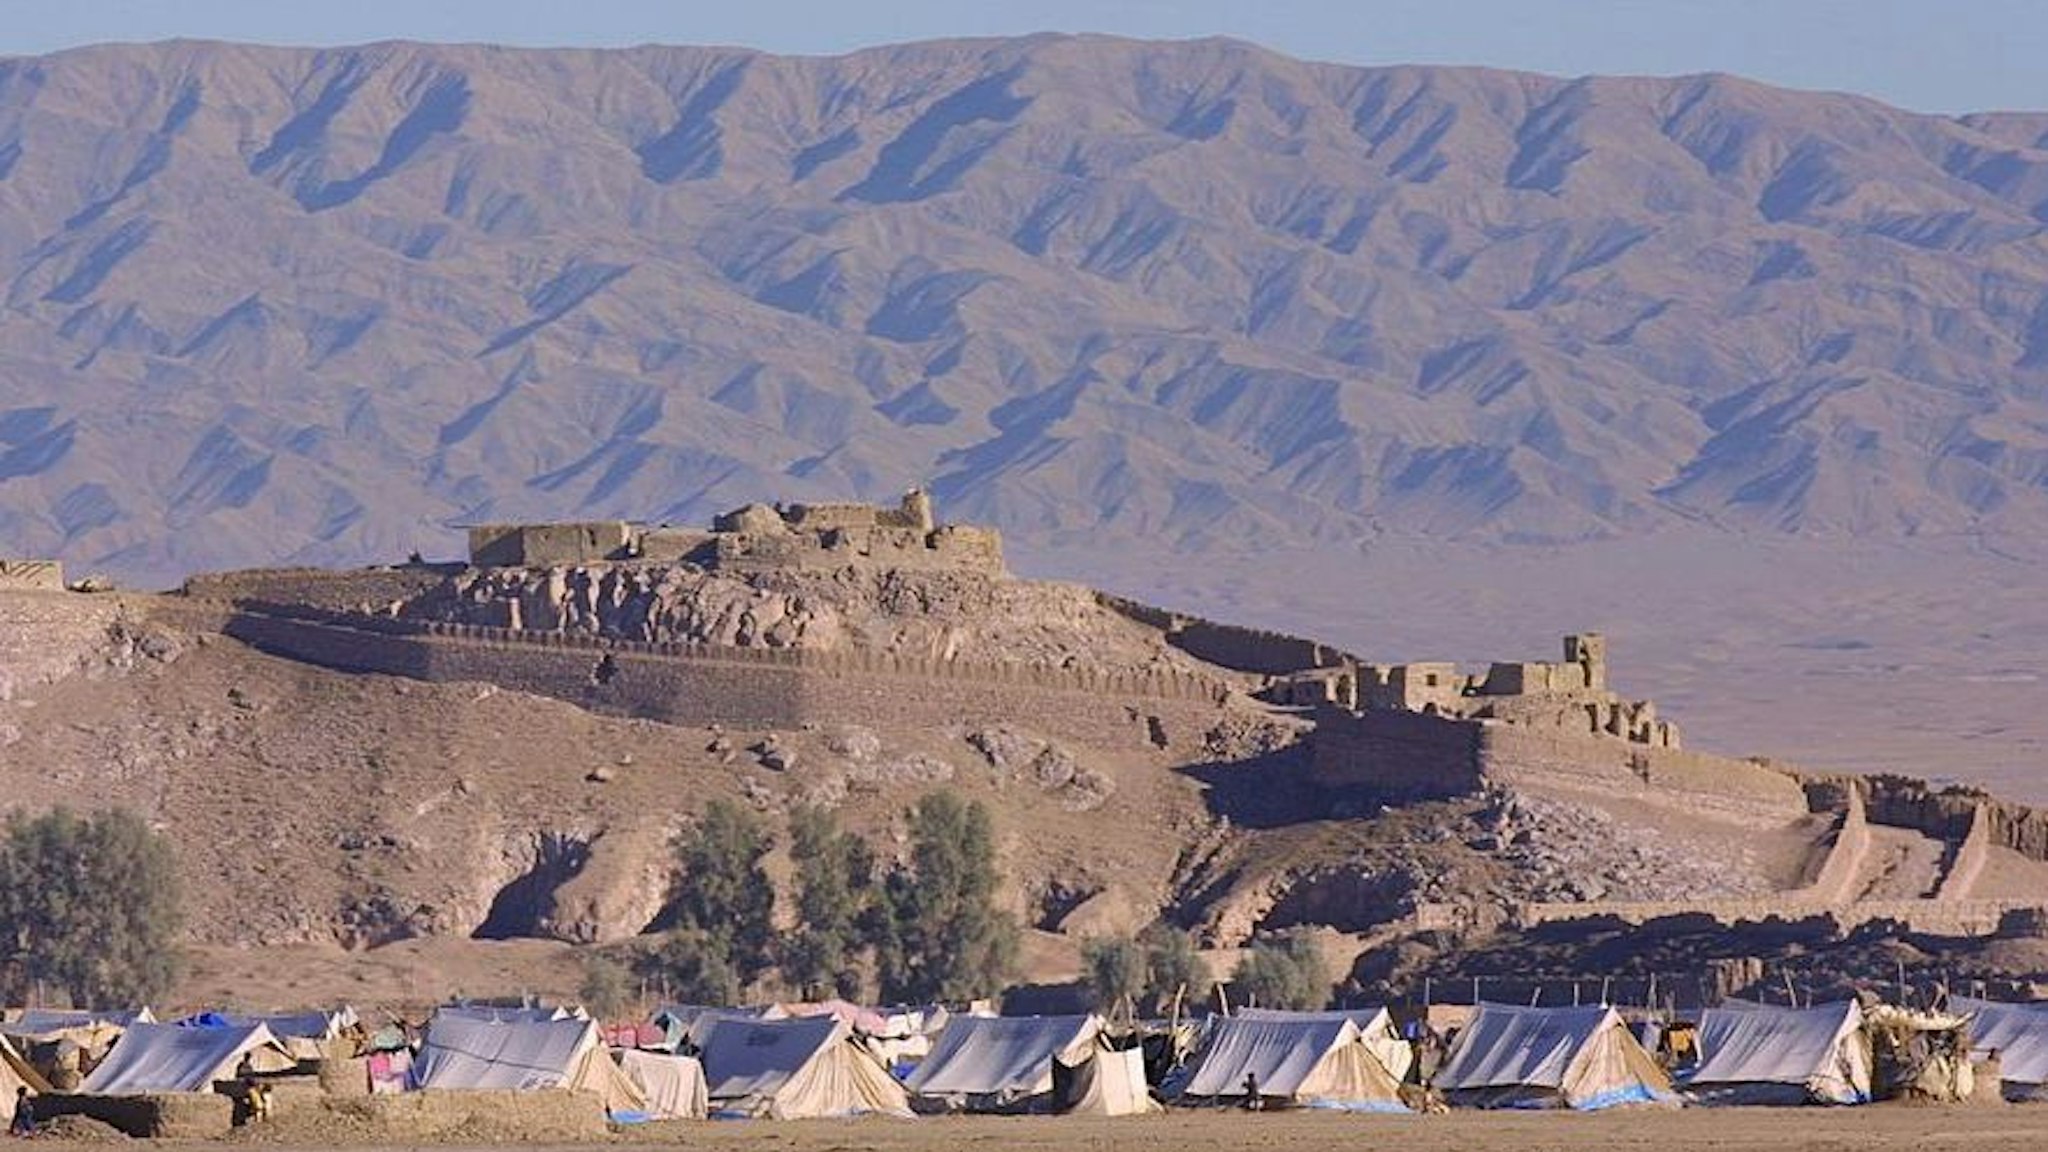 AFGHANISTAN - DECEMBER 01: Kandahar Road On January 12Th, 2001, Afghanistan. Afghan Refugee Camp Near The City Of Spin Boldak. In The Background, Pakistan Mountains.